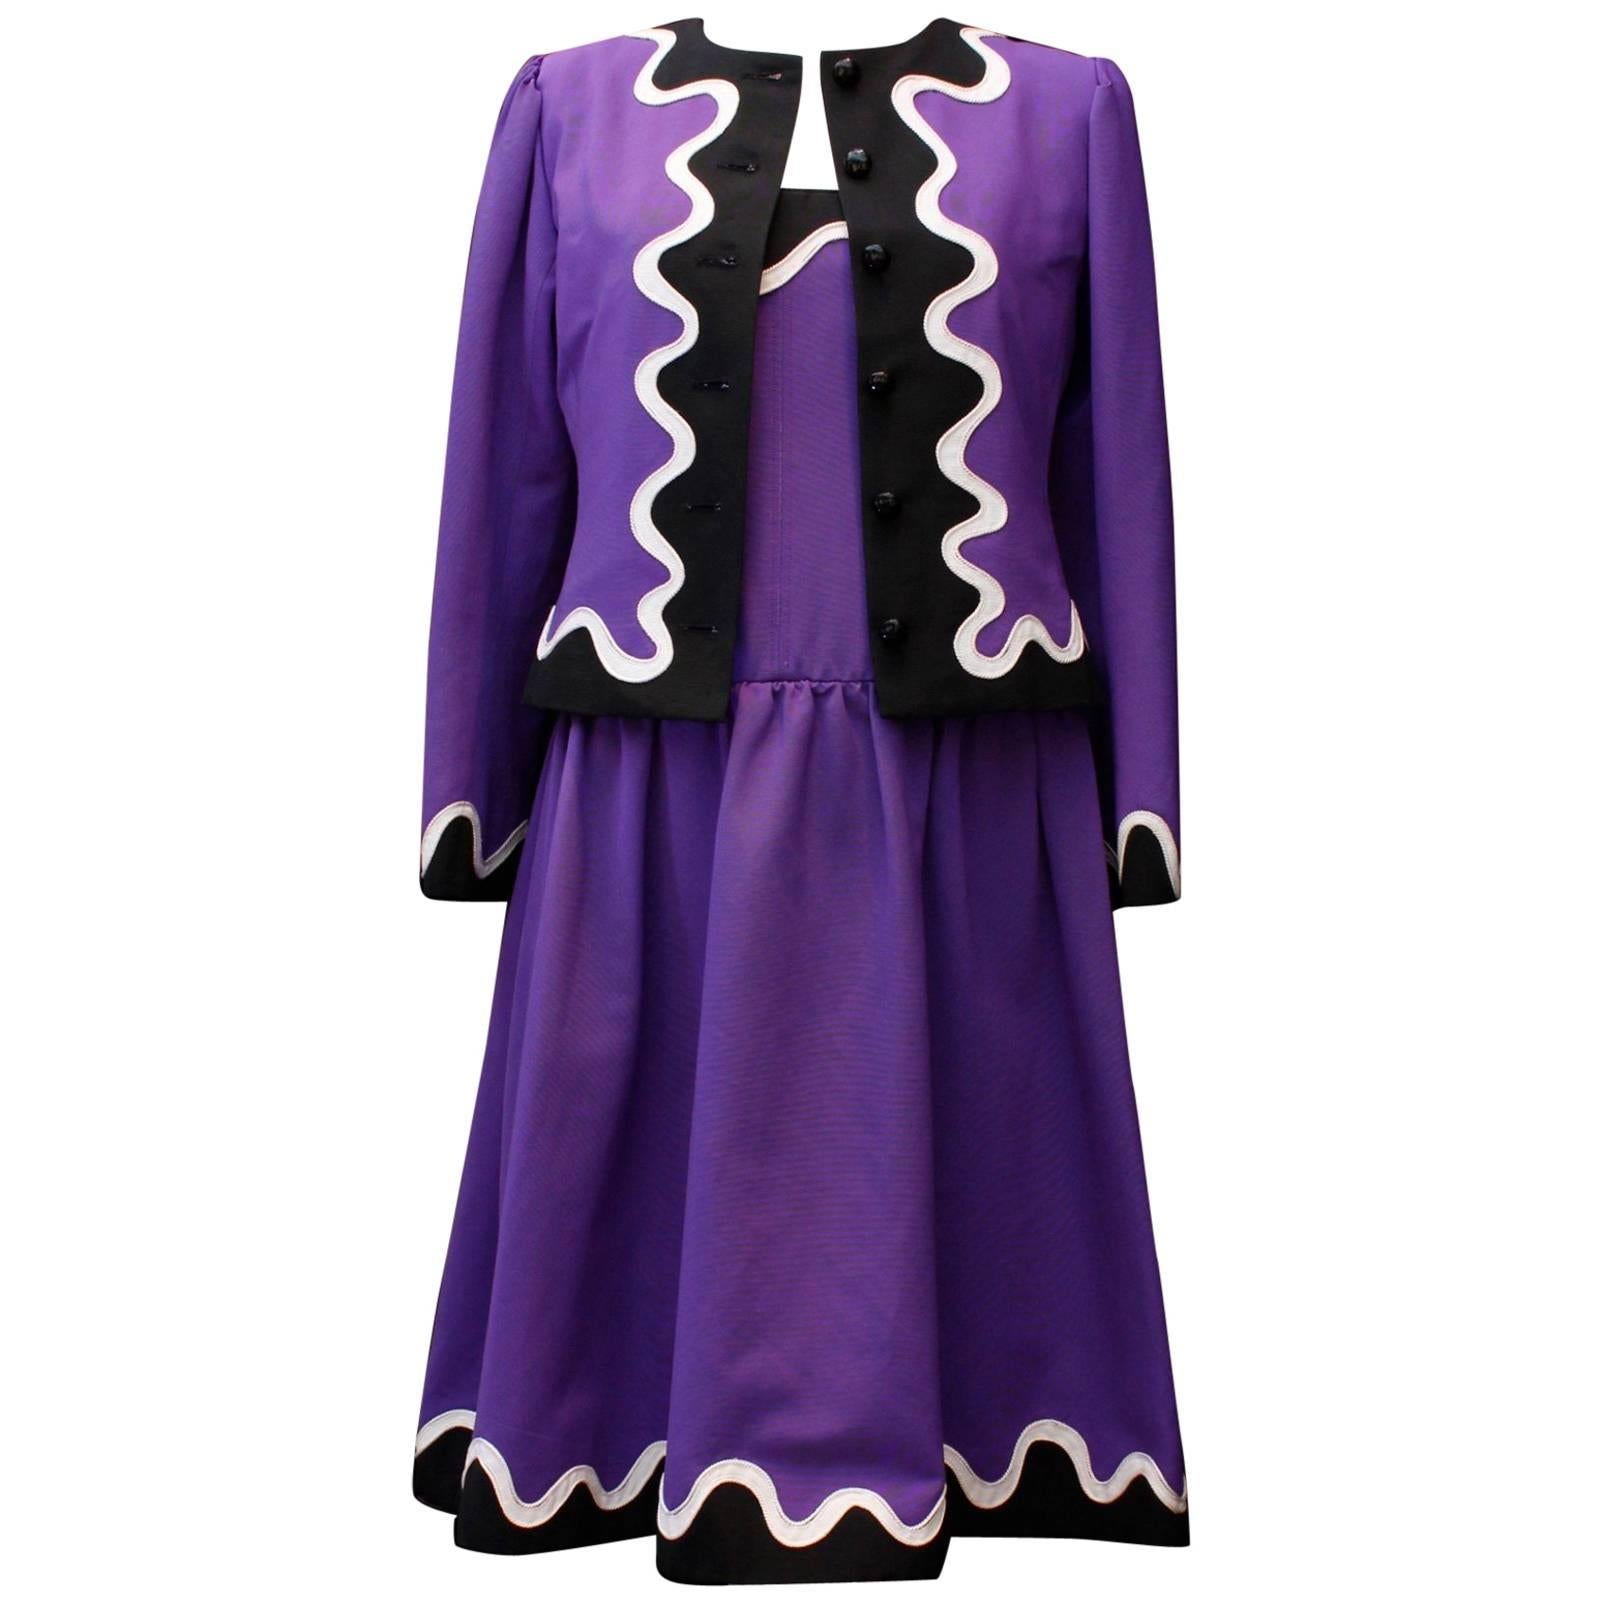 Yves Saint Laurent Rive Gauche dress and jacket set in purple, black and white  For Sale